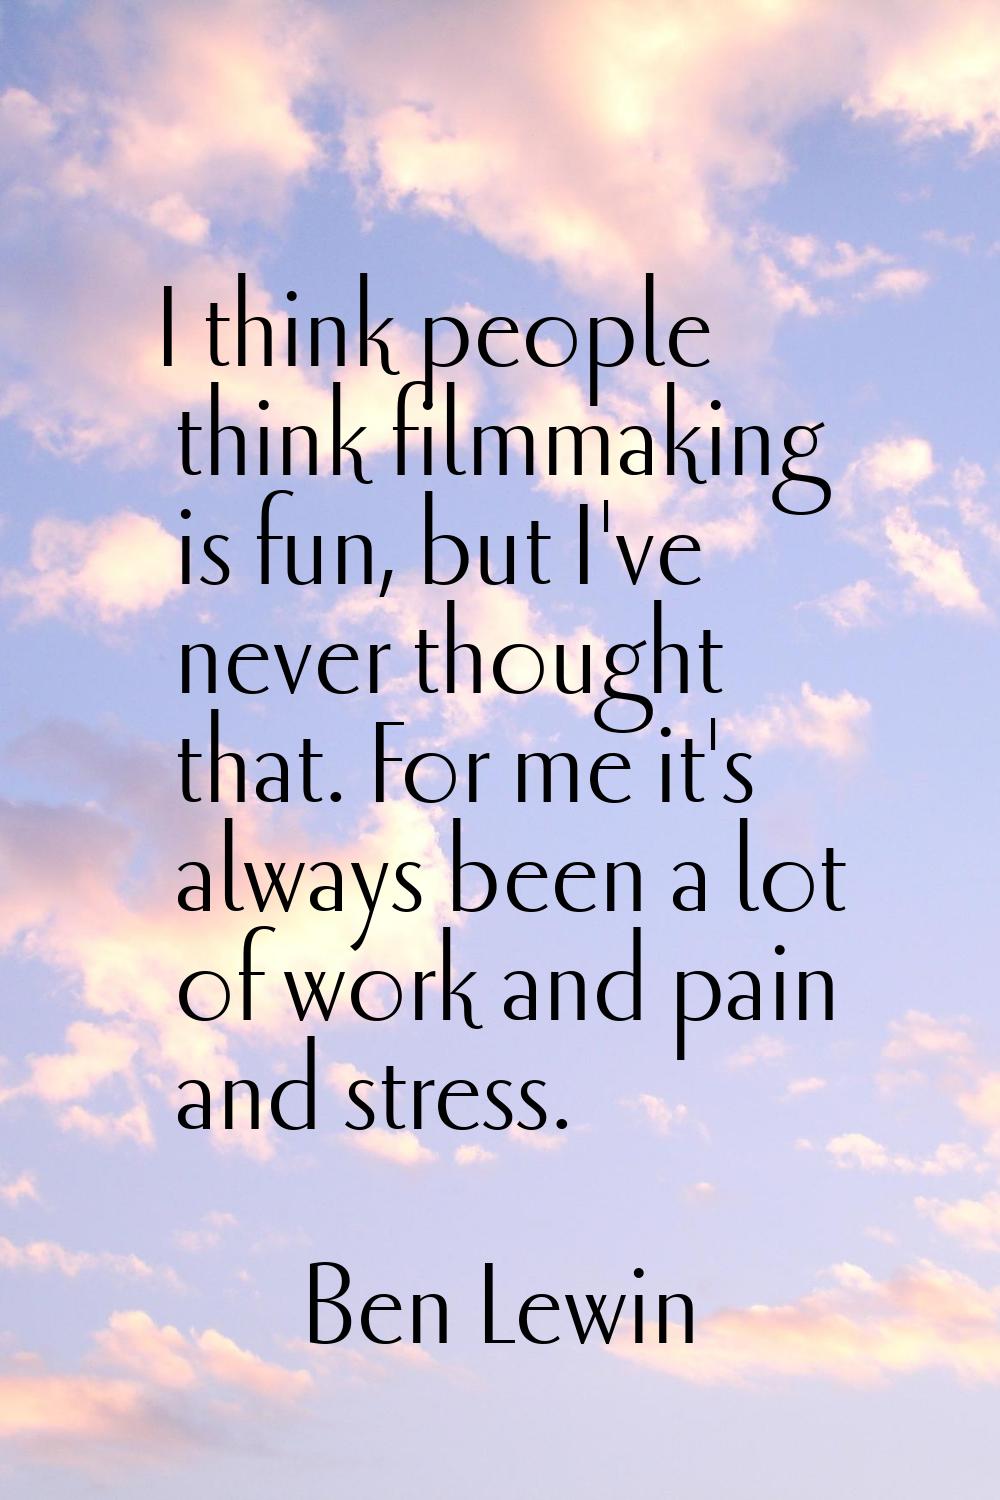 I think people think filmmaking is fun, but I've never thought that. For me it's always been a lot 